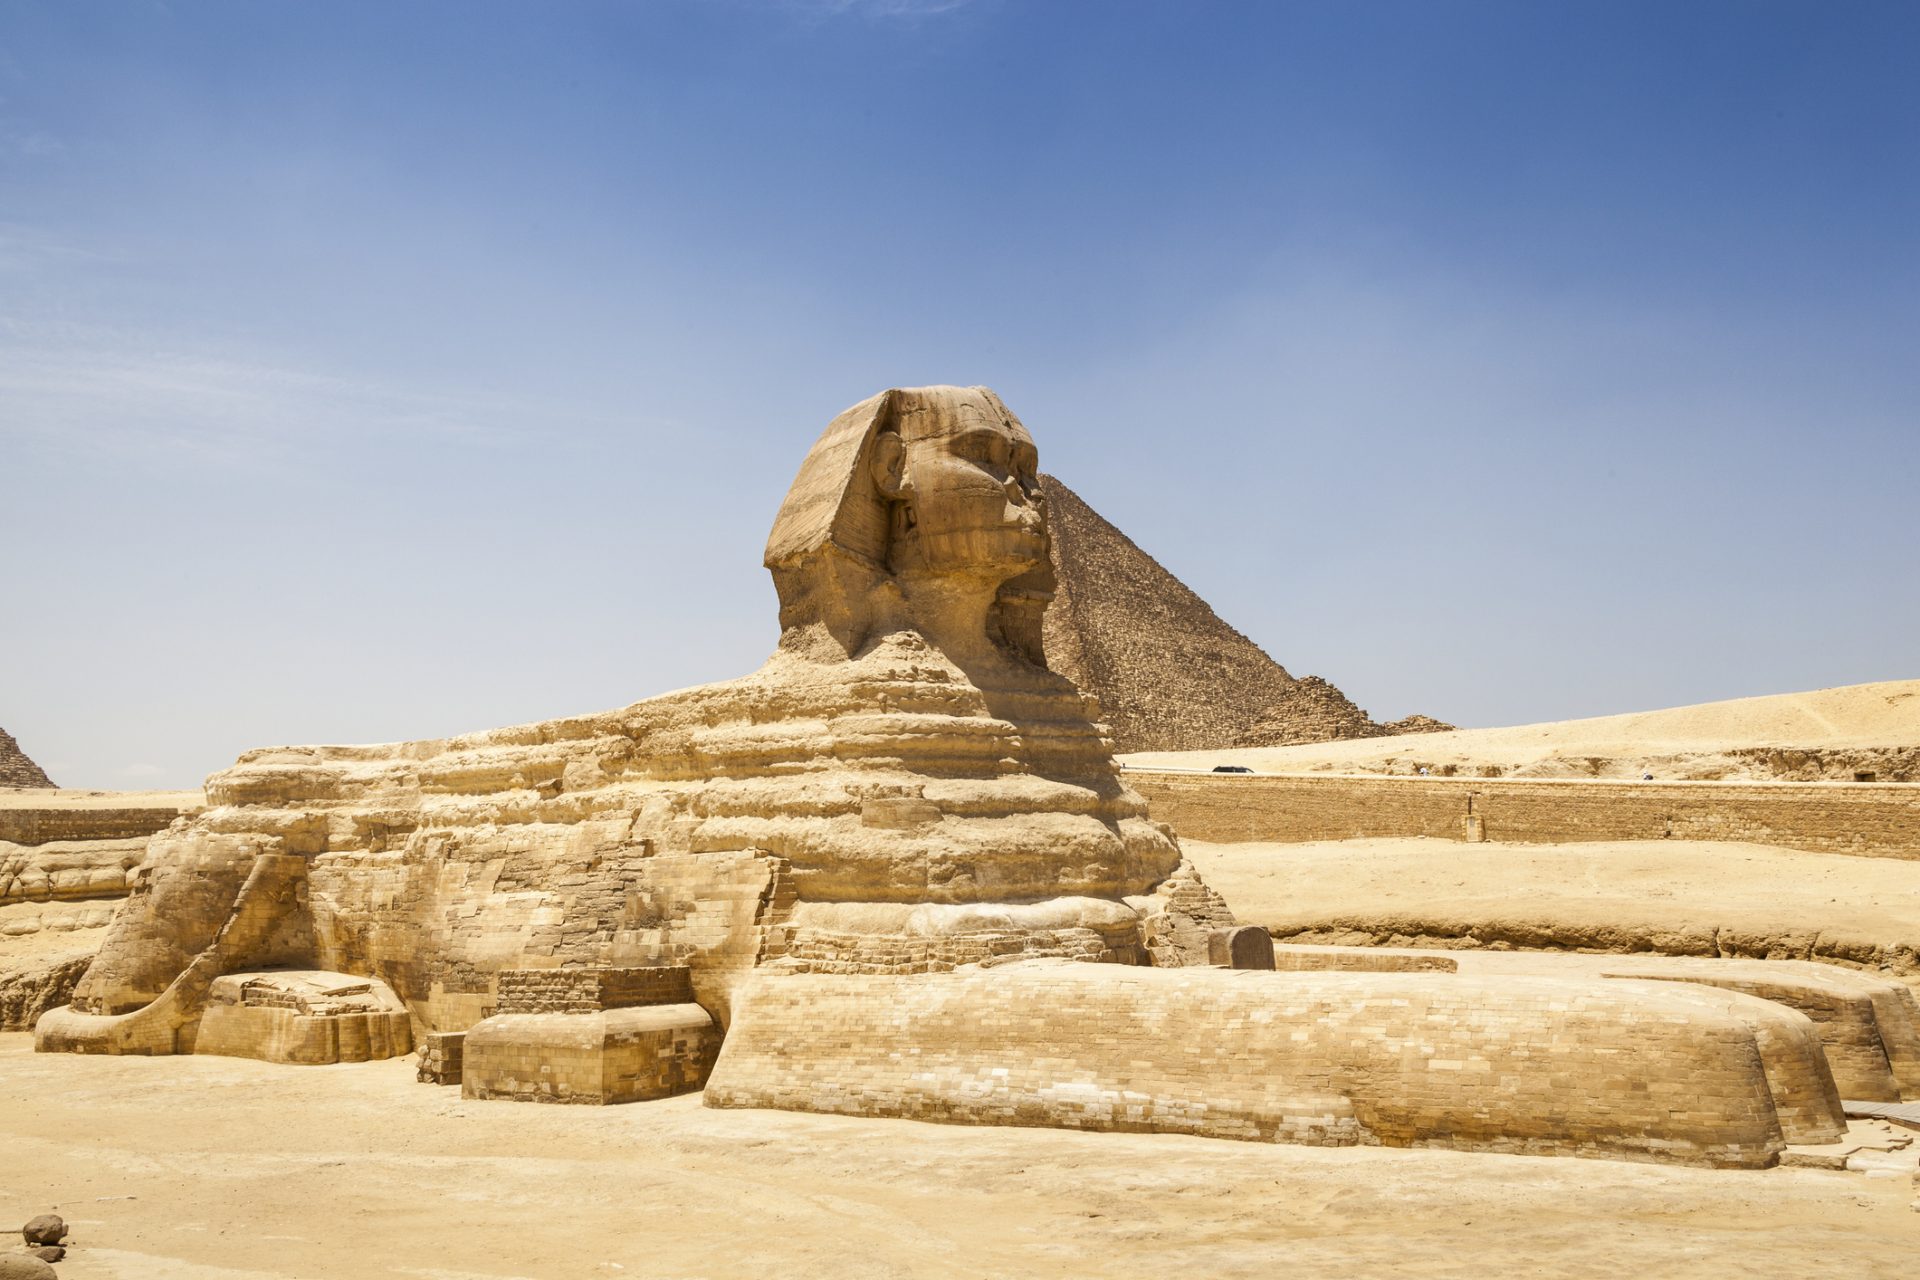 How old is the Sphinx really?